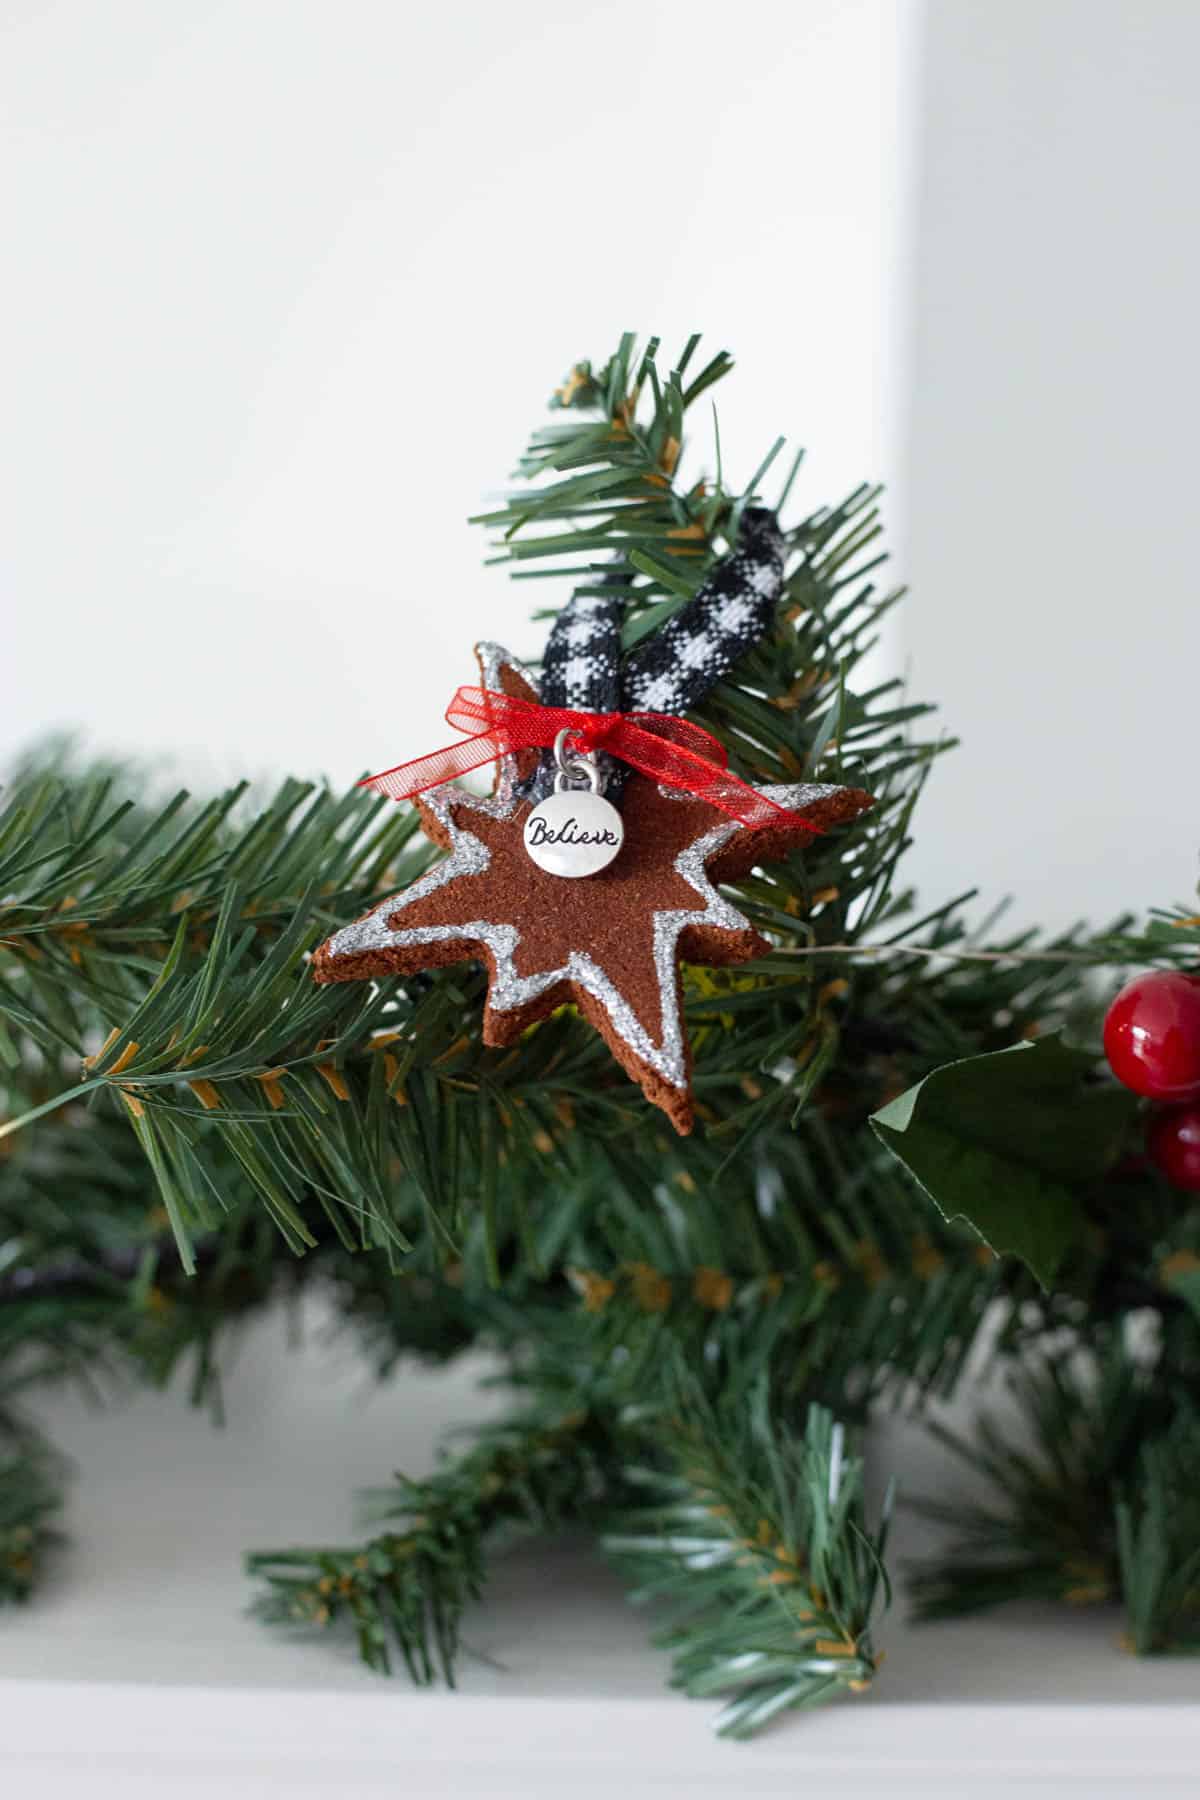 a star cinnamon ornament with a charm that says 'Believe' hanging on a garland